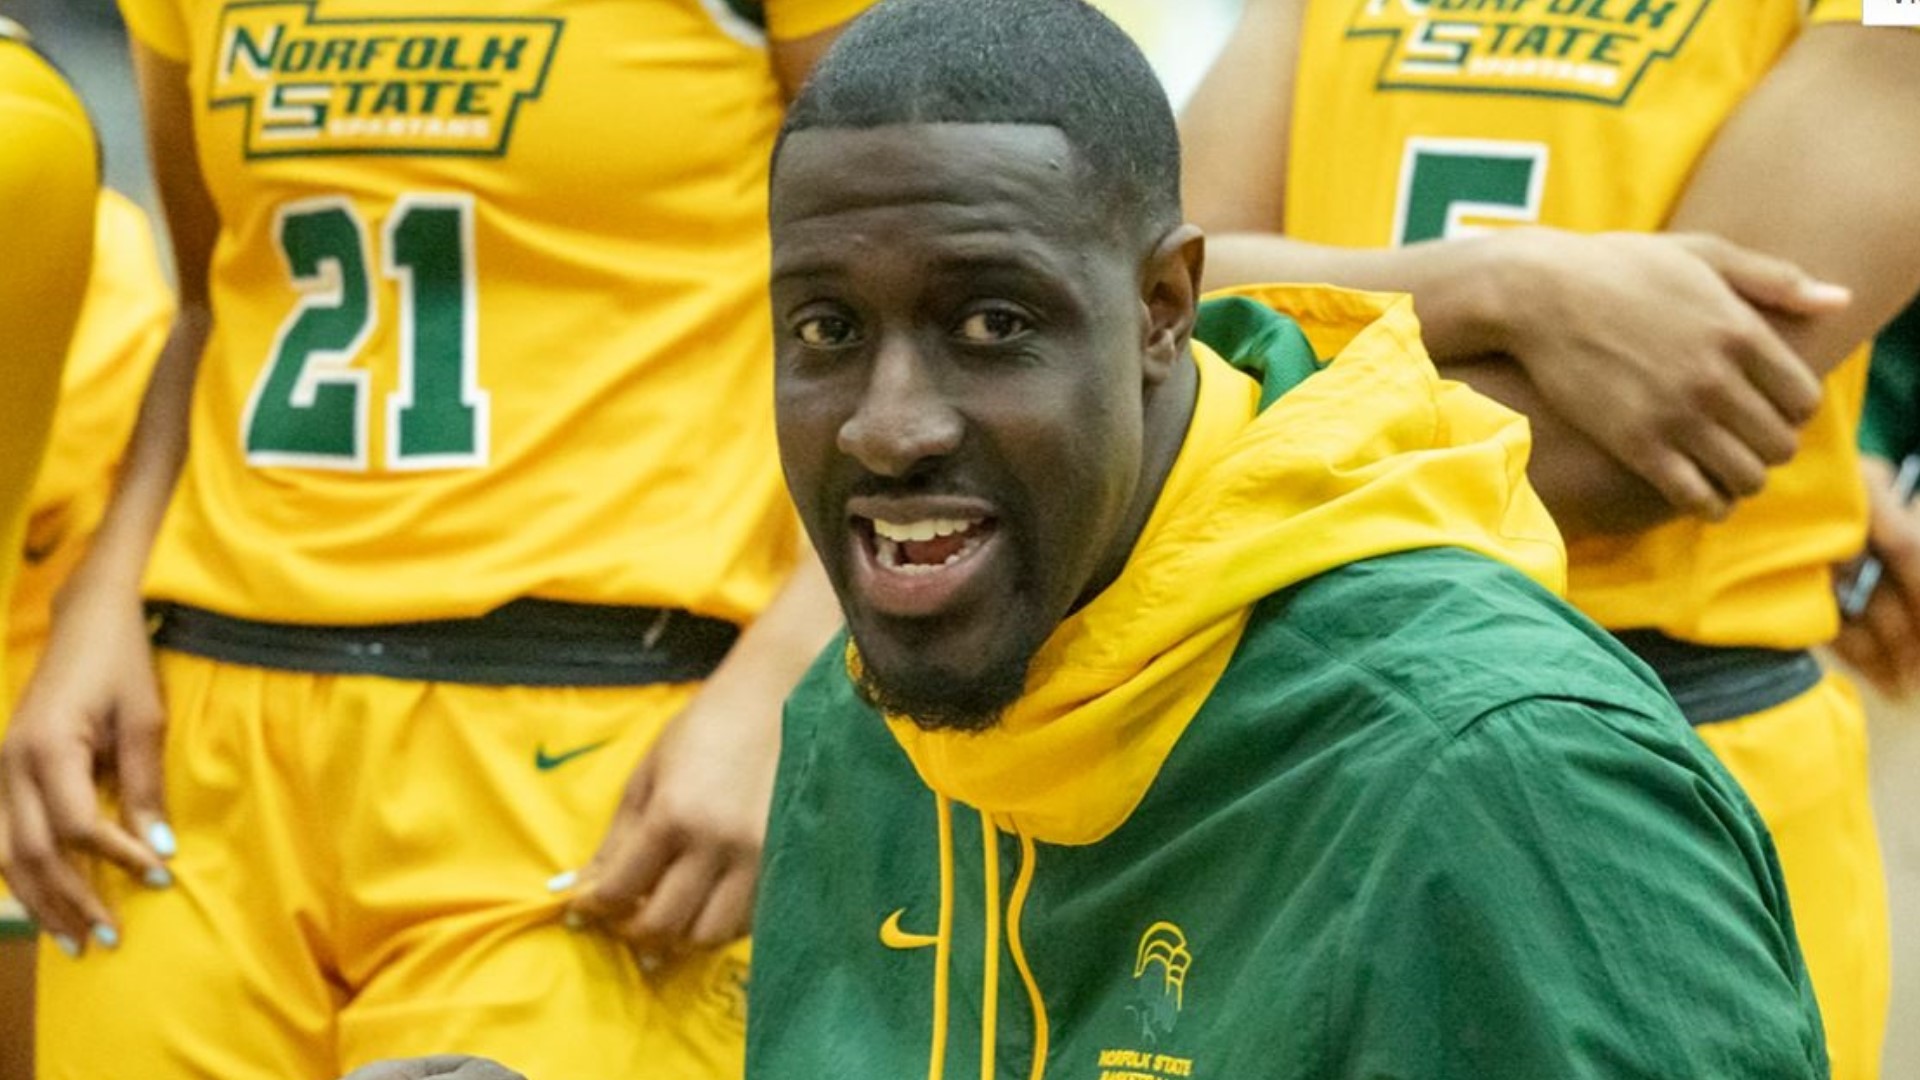 Vickers, who just completed his eighth season at Norfolk State, guided the Spartans to their second consecutive Mid-Eastern Athletic Conference (MEAC) regular season